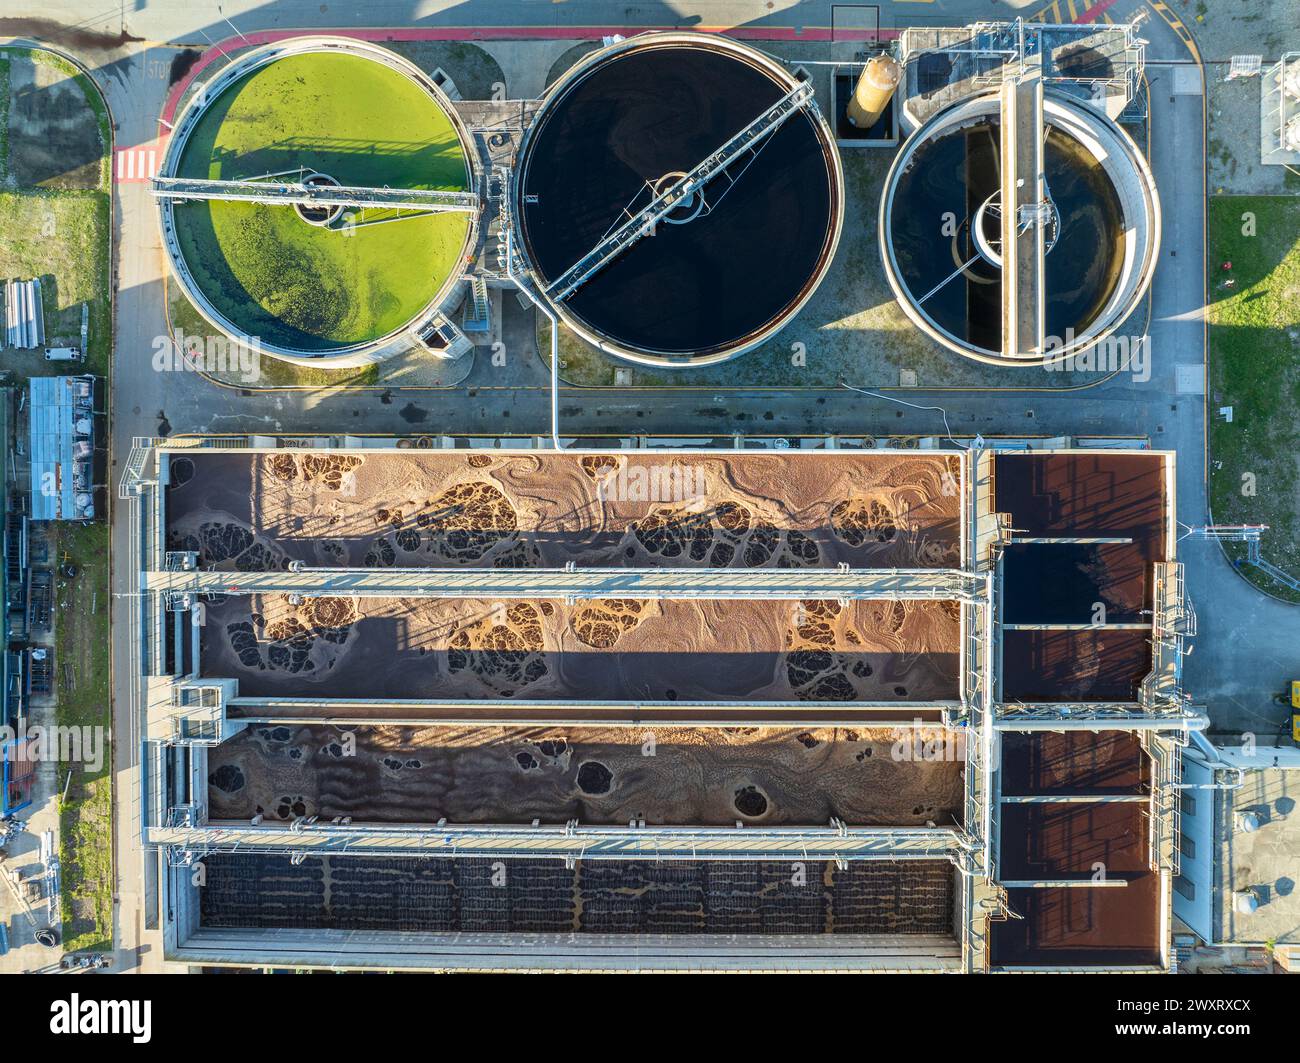 Aerial view of a waste water treatment plant in the chemical industry Stock Photo